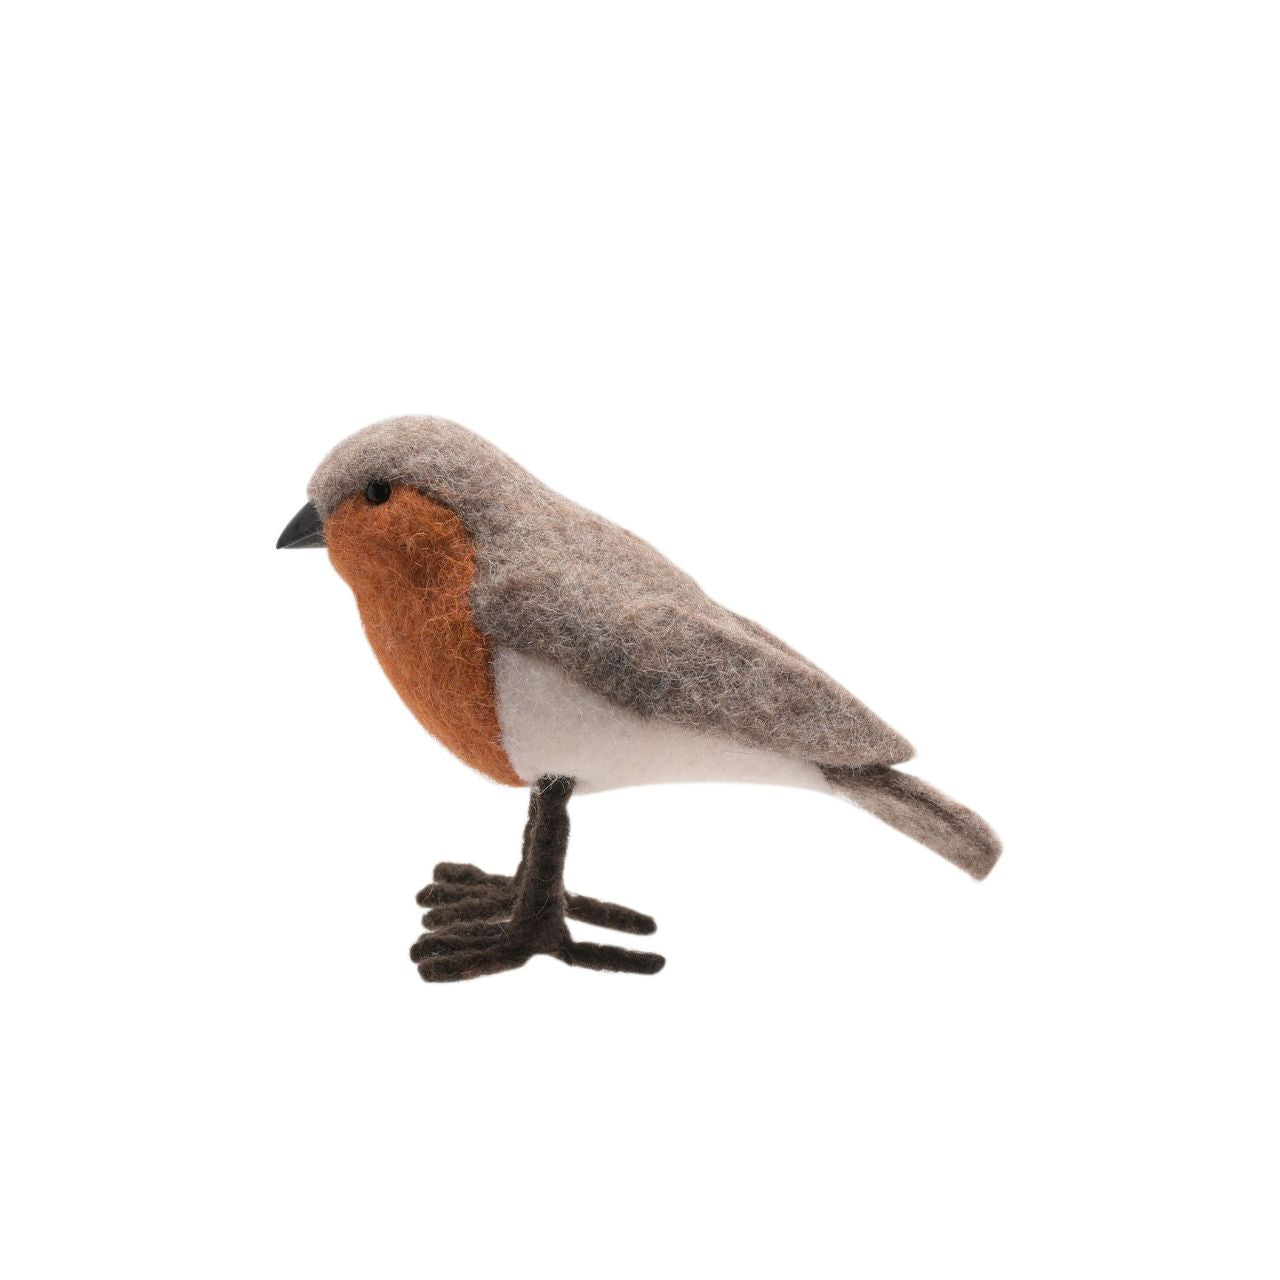 Robin Christmas Decoration - Felt  A felt robin decoration by THE SEASONAL GIFT CO.  This adorable decoration is brimming with traditional Christmas charm.